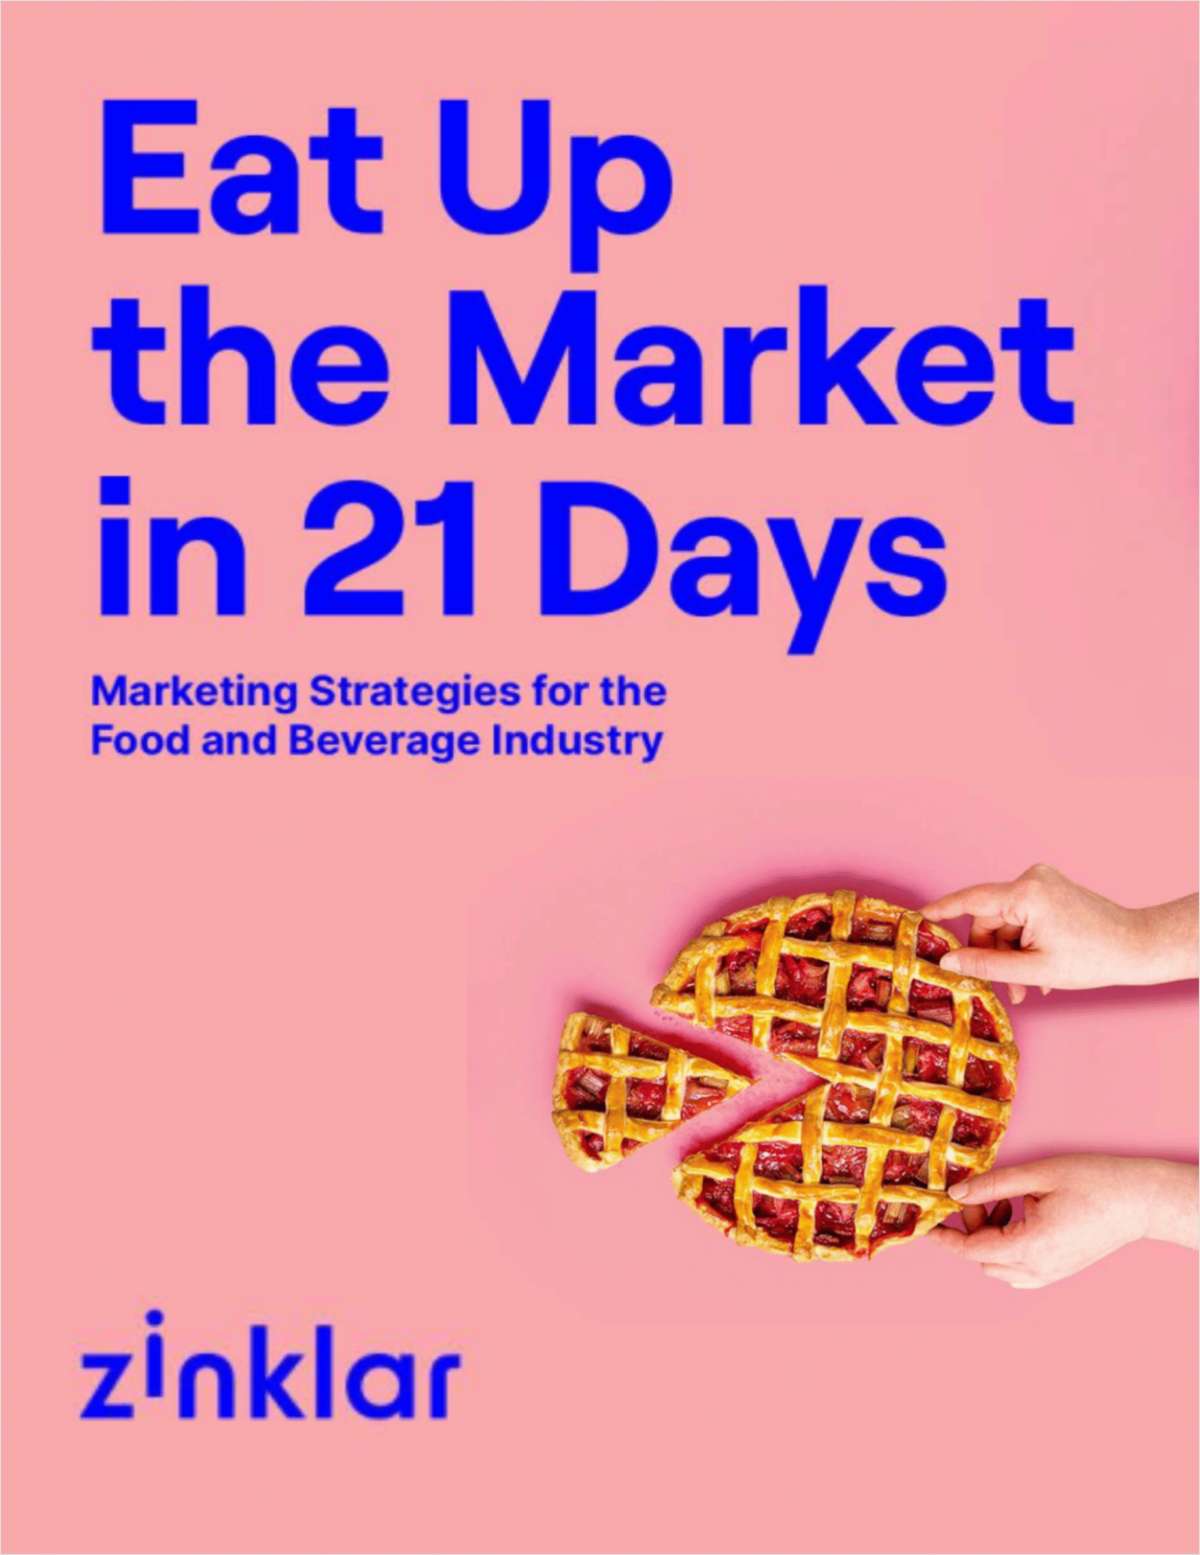 Eat Up The Market in 21 Days